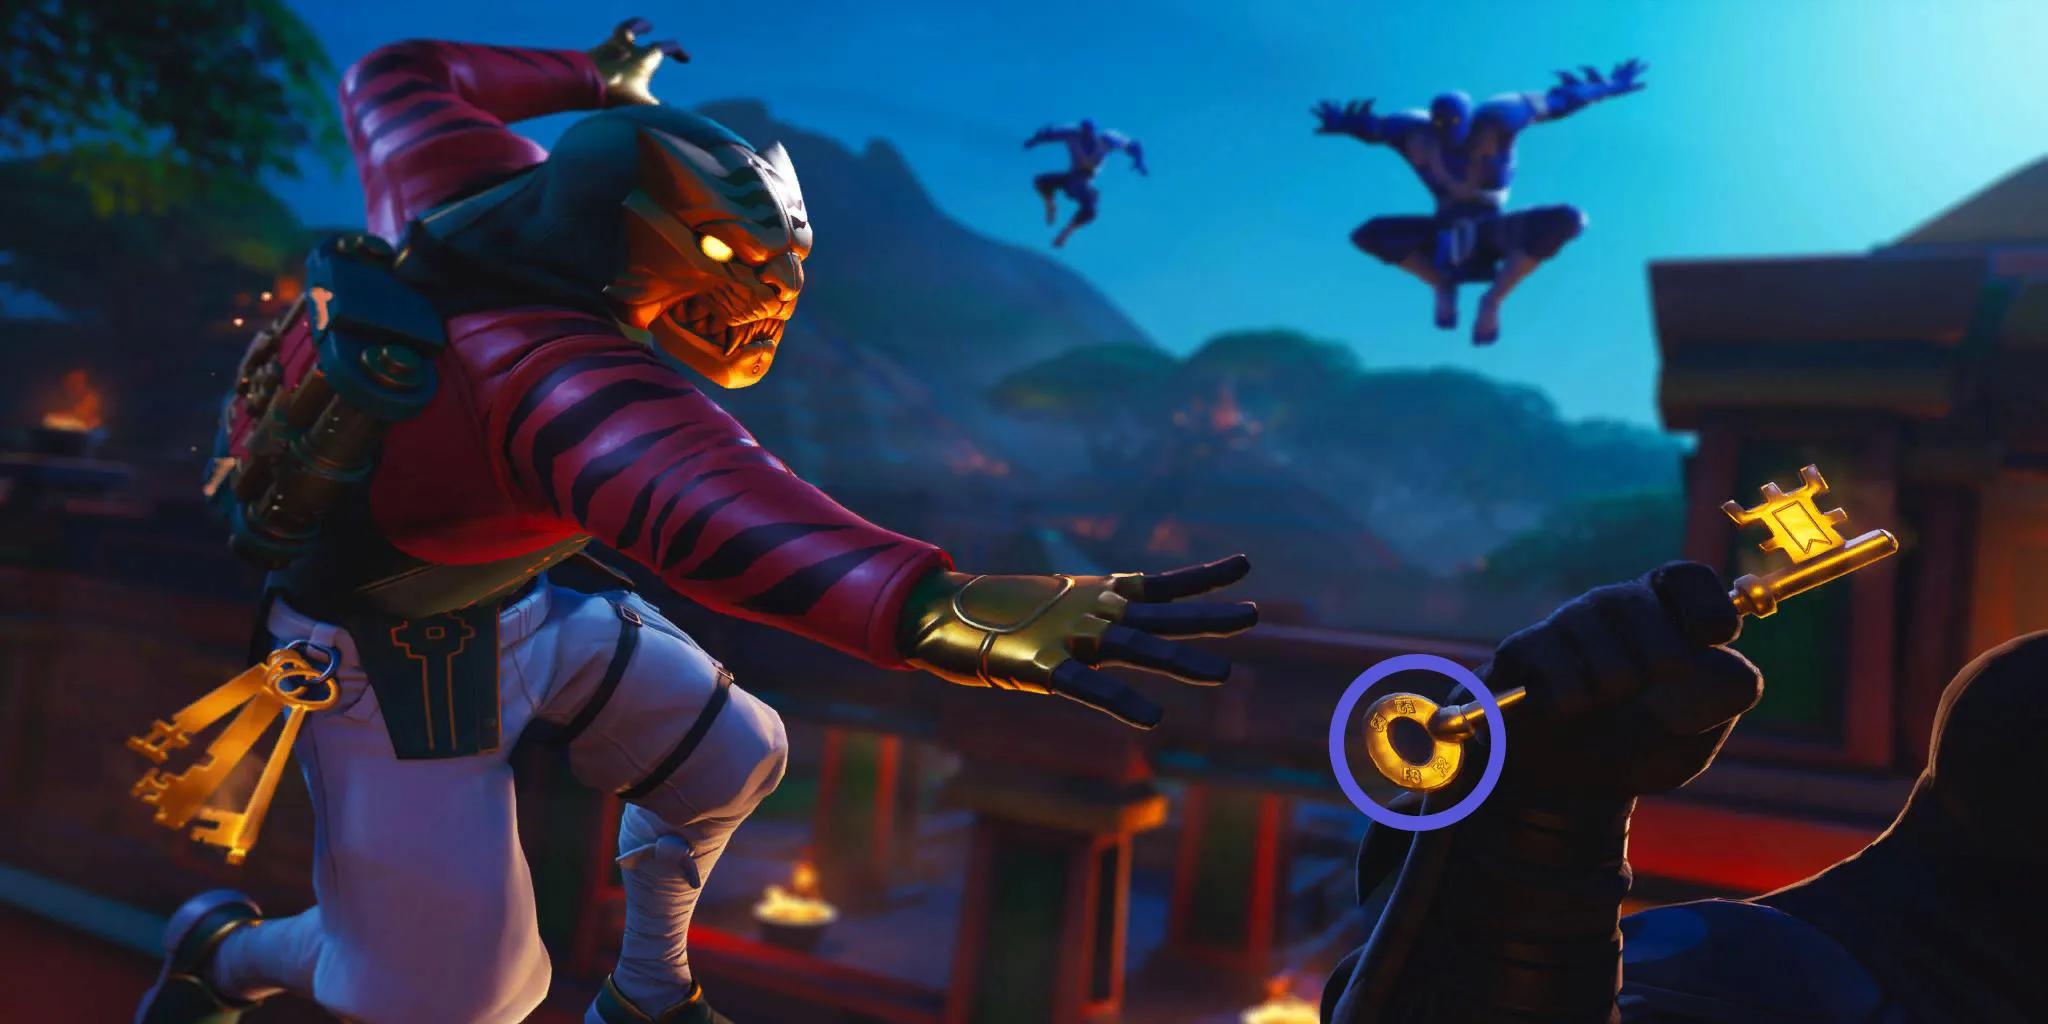 Fortnite Season 8 Secret Battle Stars Locations All Hidden Banners - loading screen with the master key skin attempting to steal some keys or prevent one from being stolen if you look closely at the key you will find